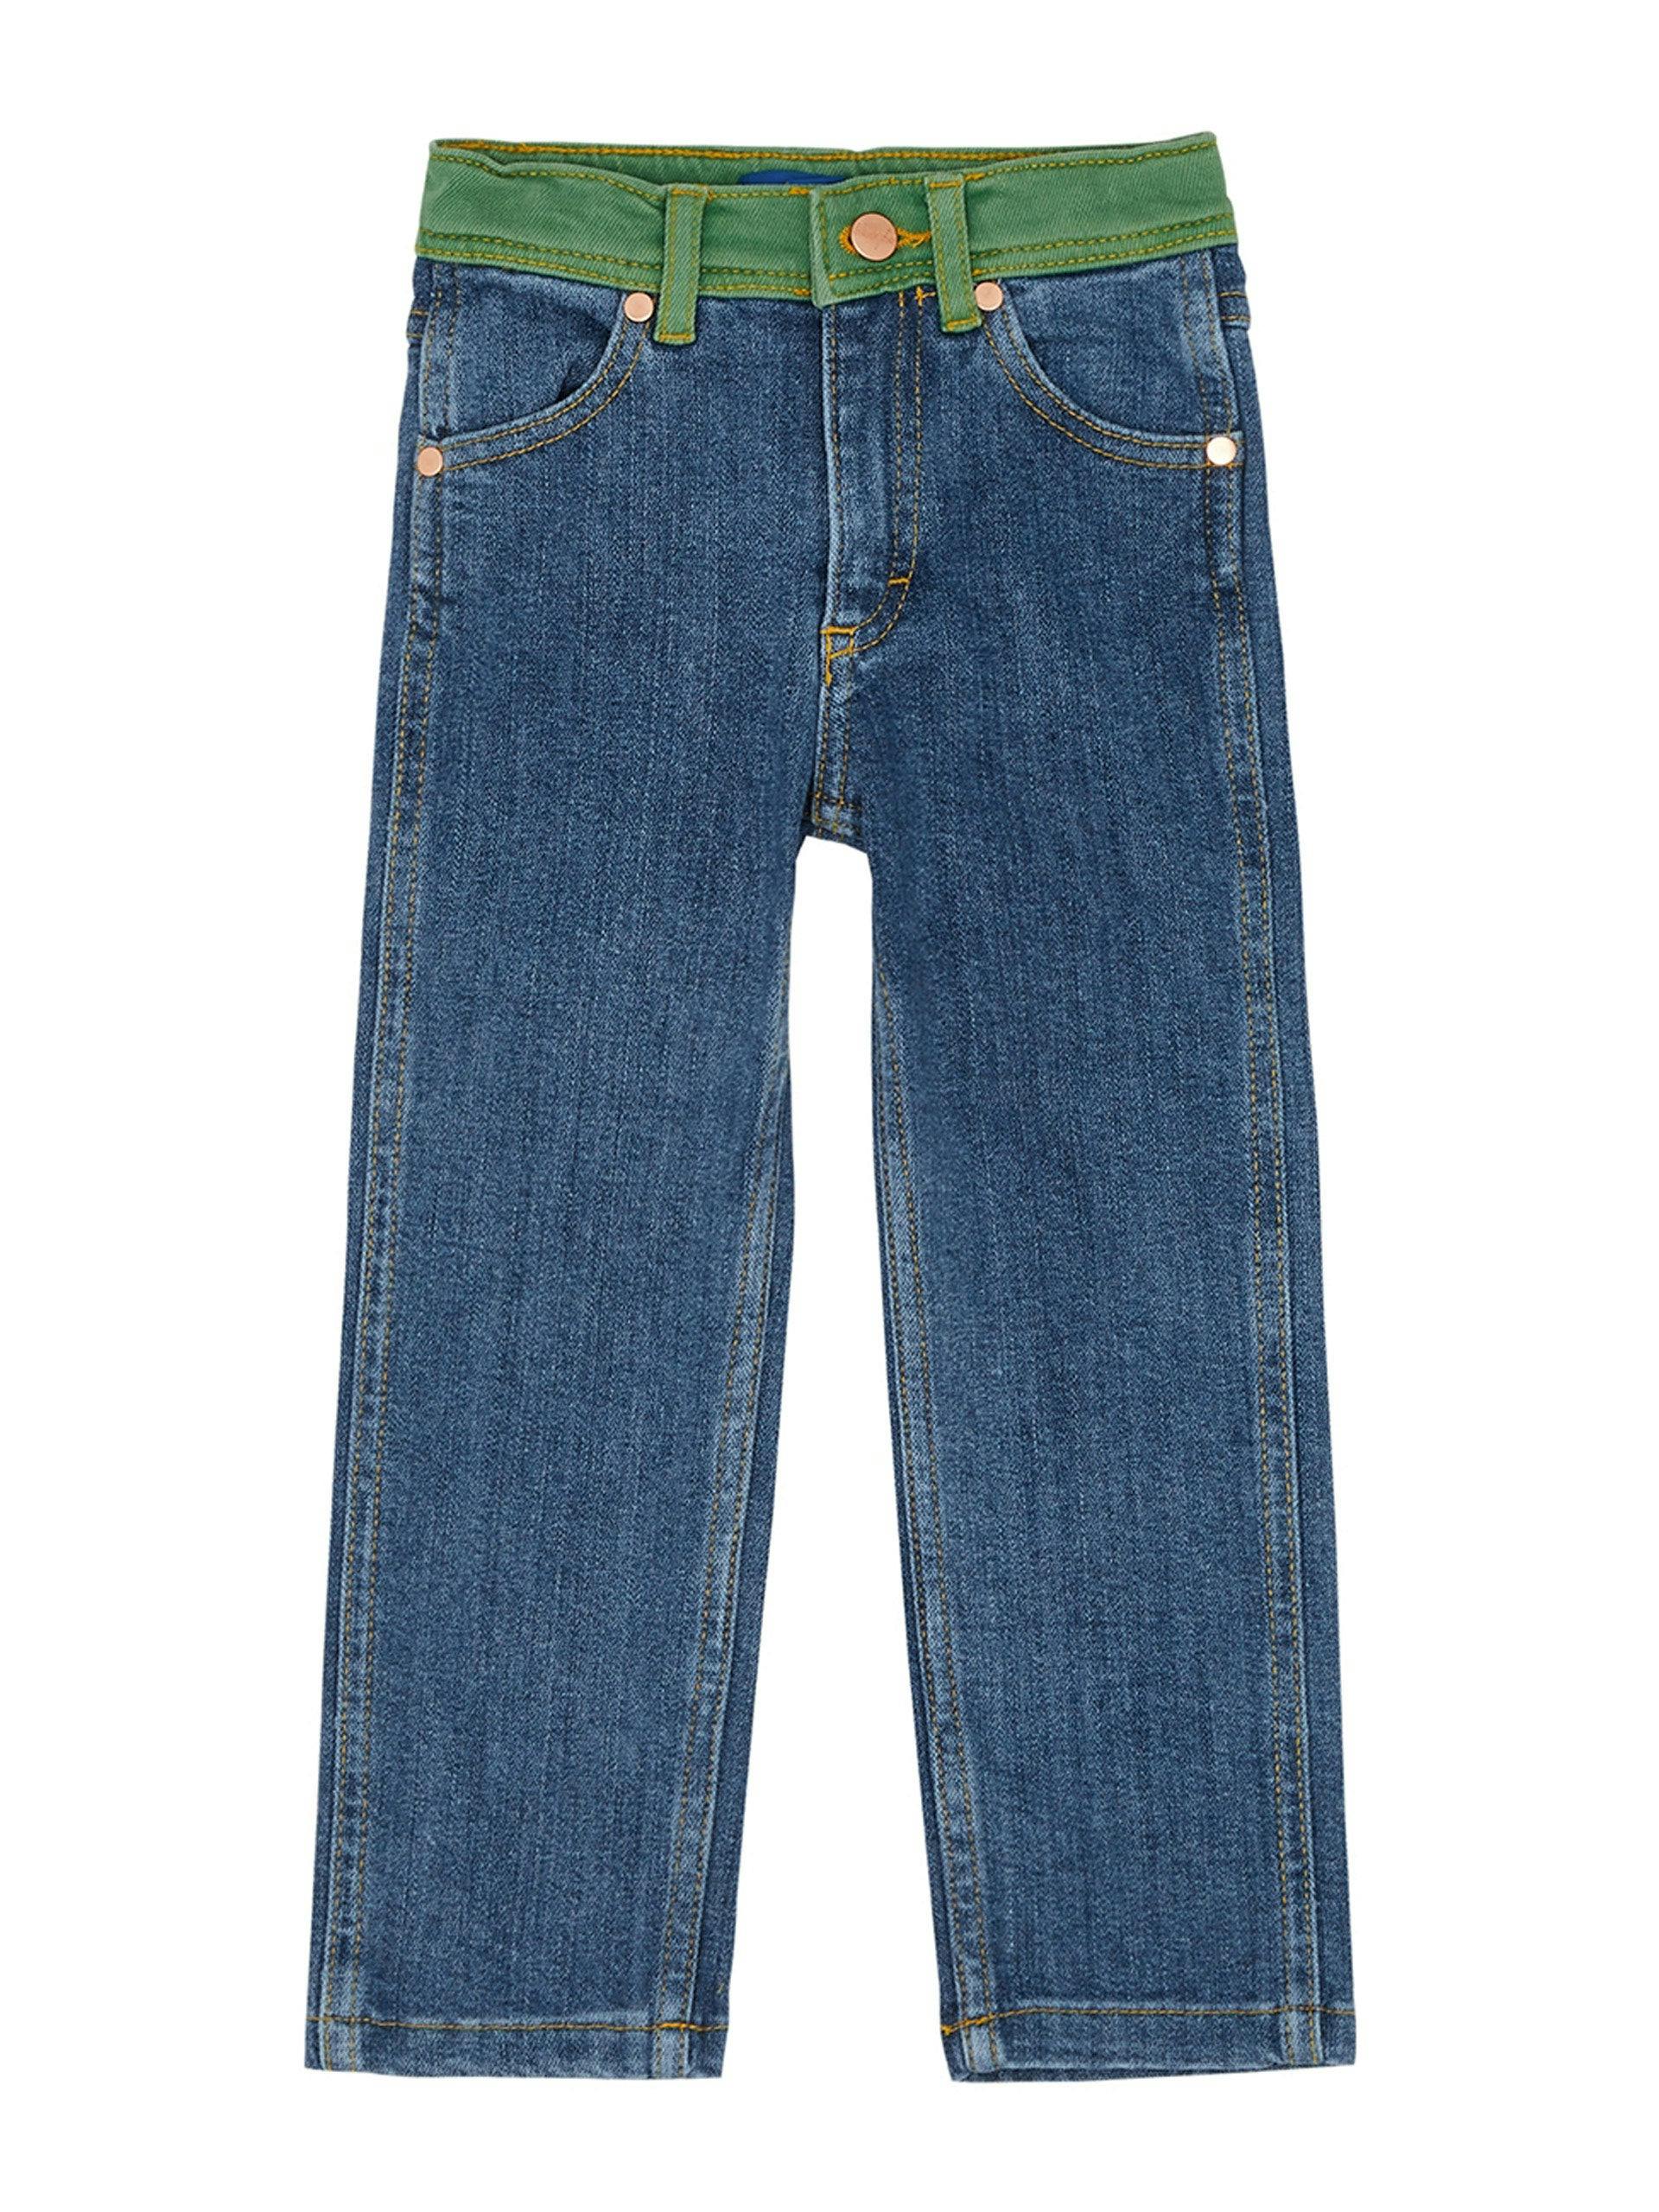 Straight leg jeans with green waistband